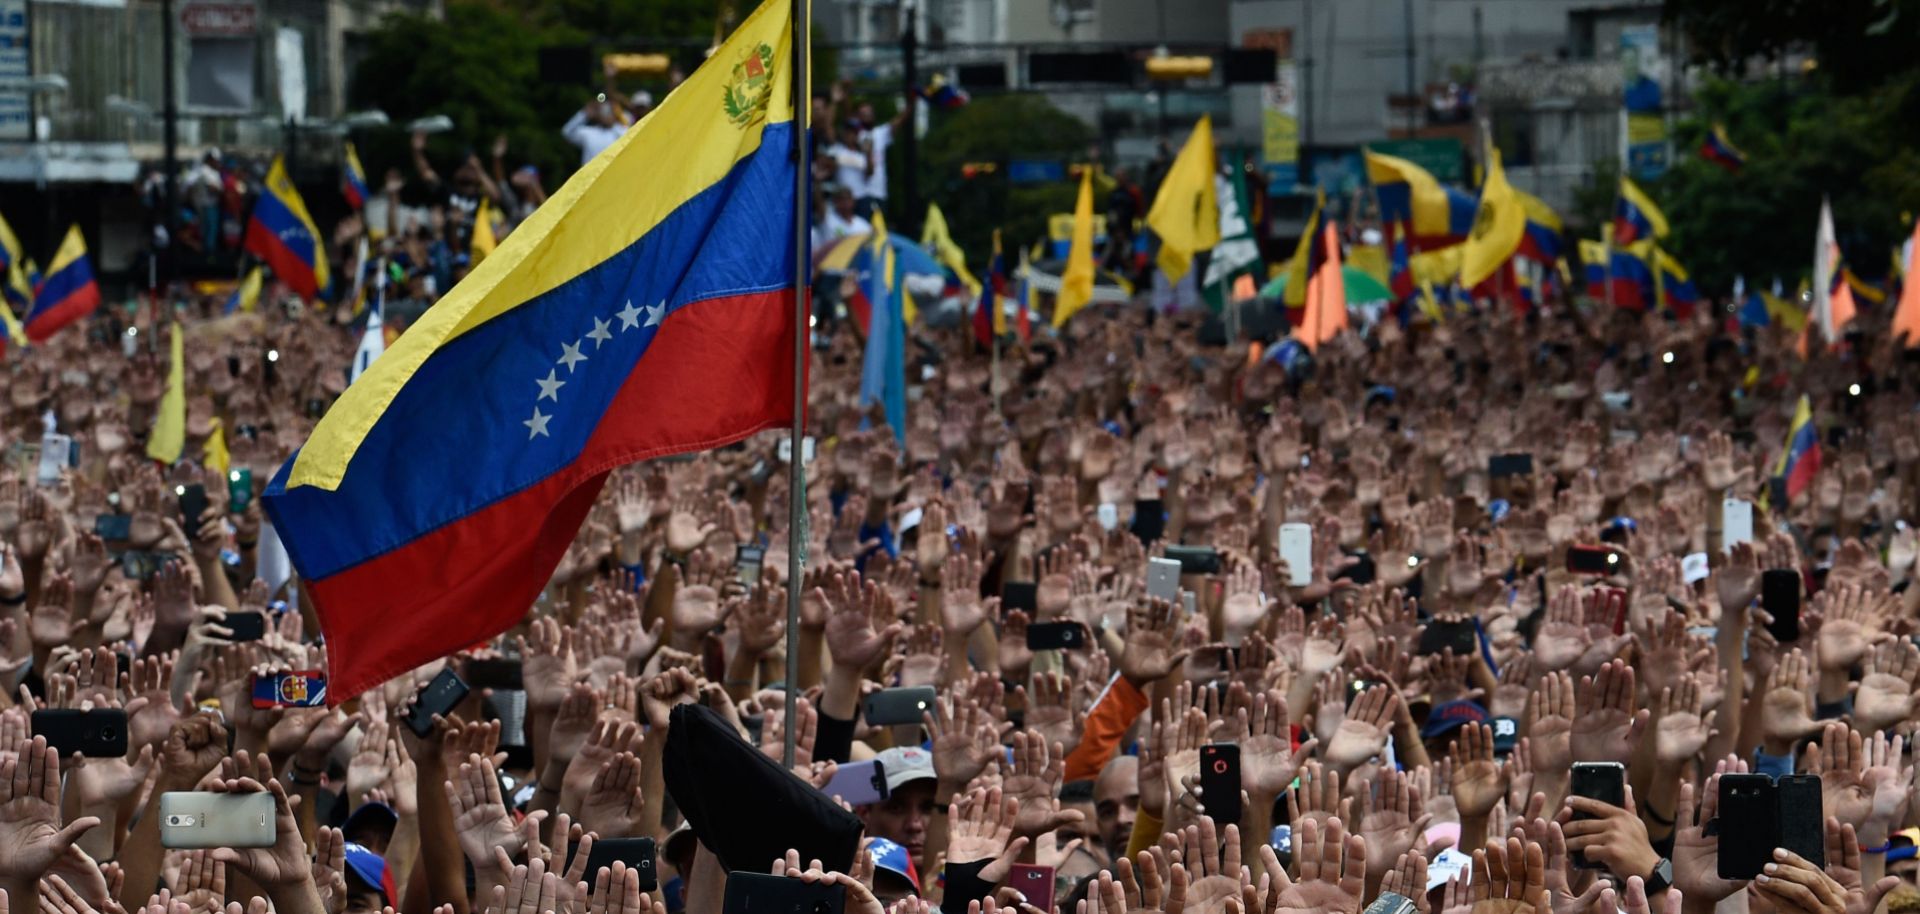 Protesters raise their hands during a rally against Venezuelan President Nicolas Maduro in Caracas on Jan. 23, 2019.